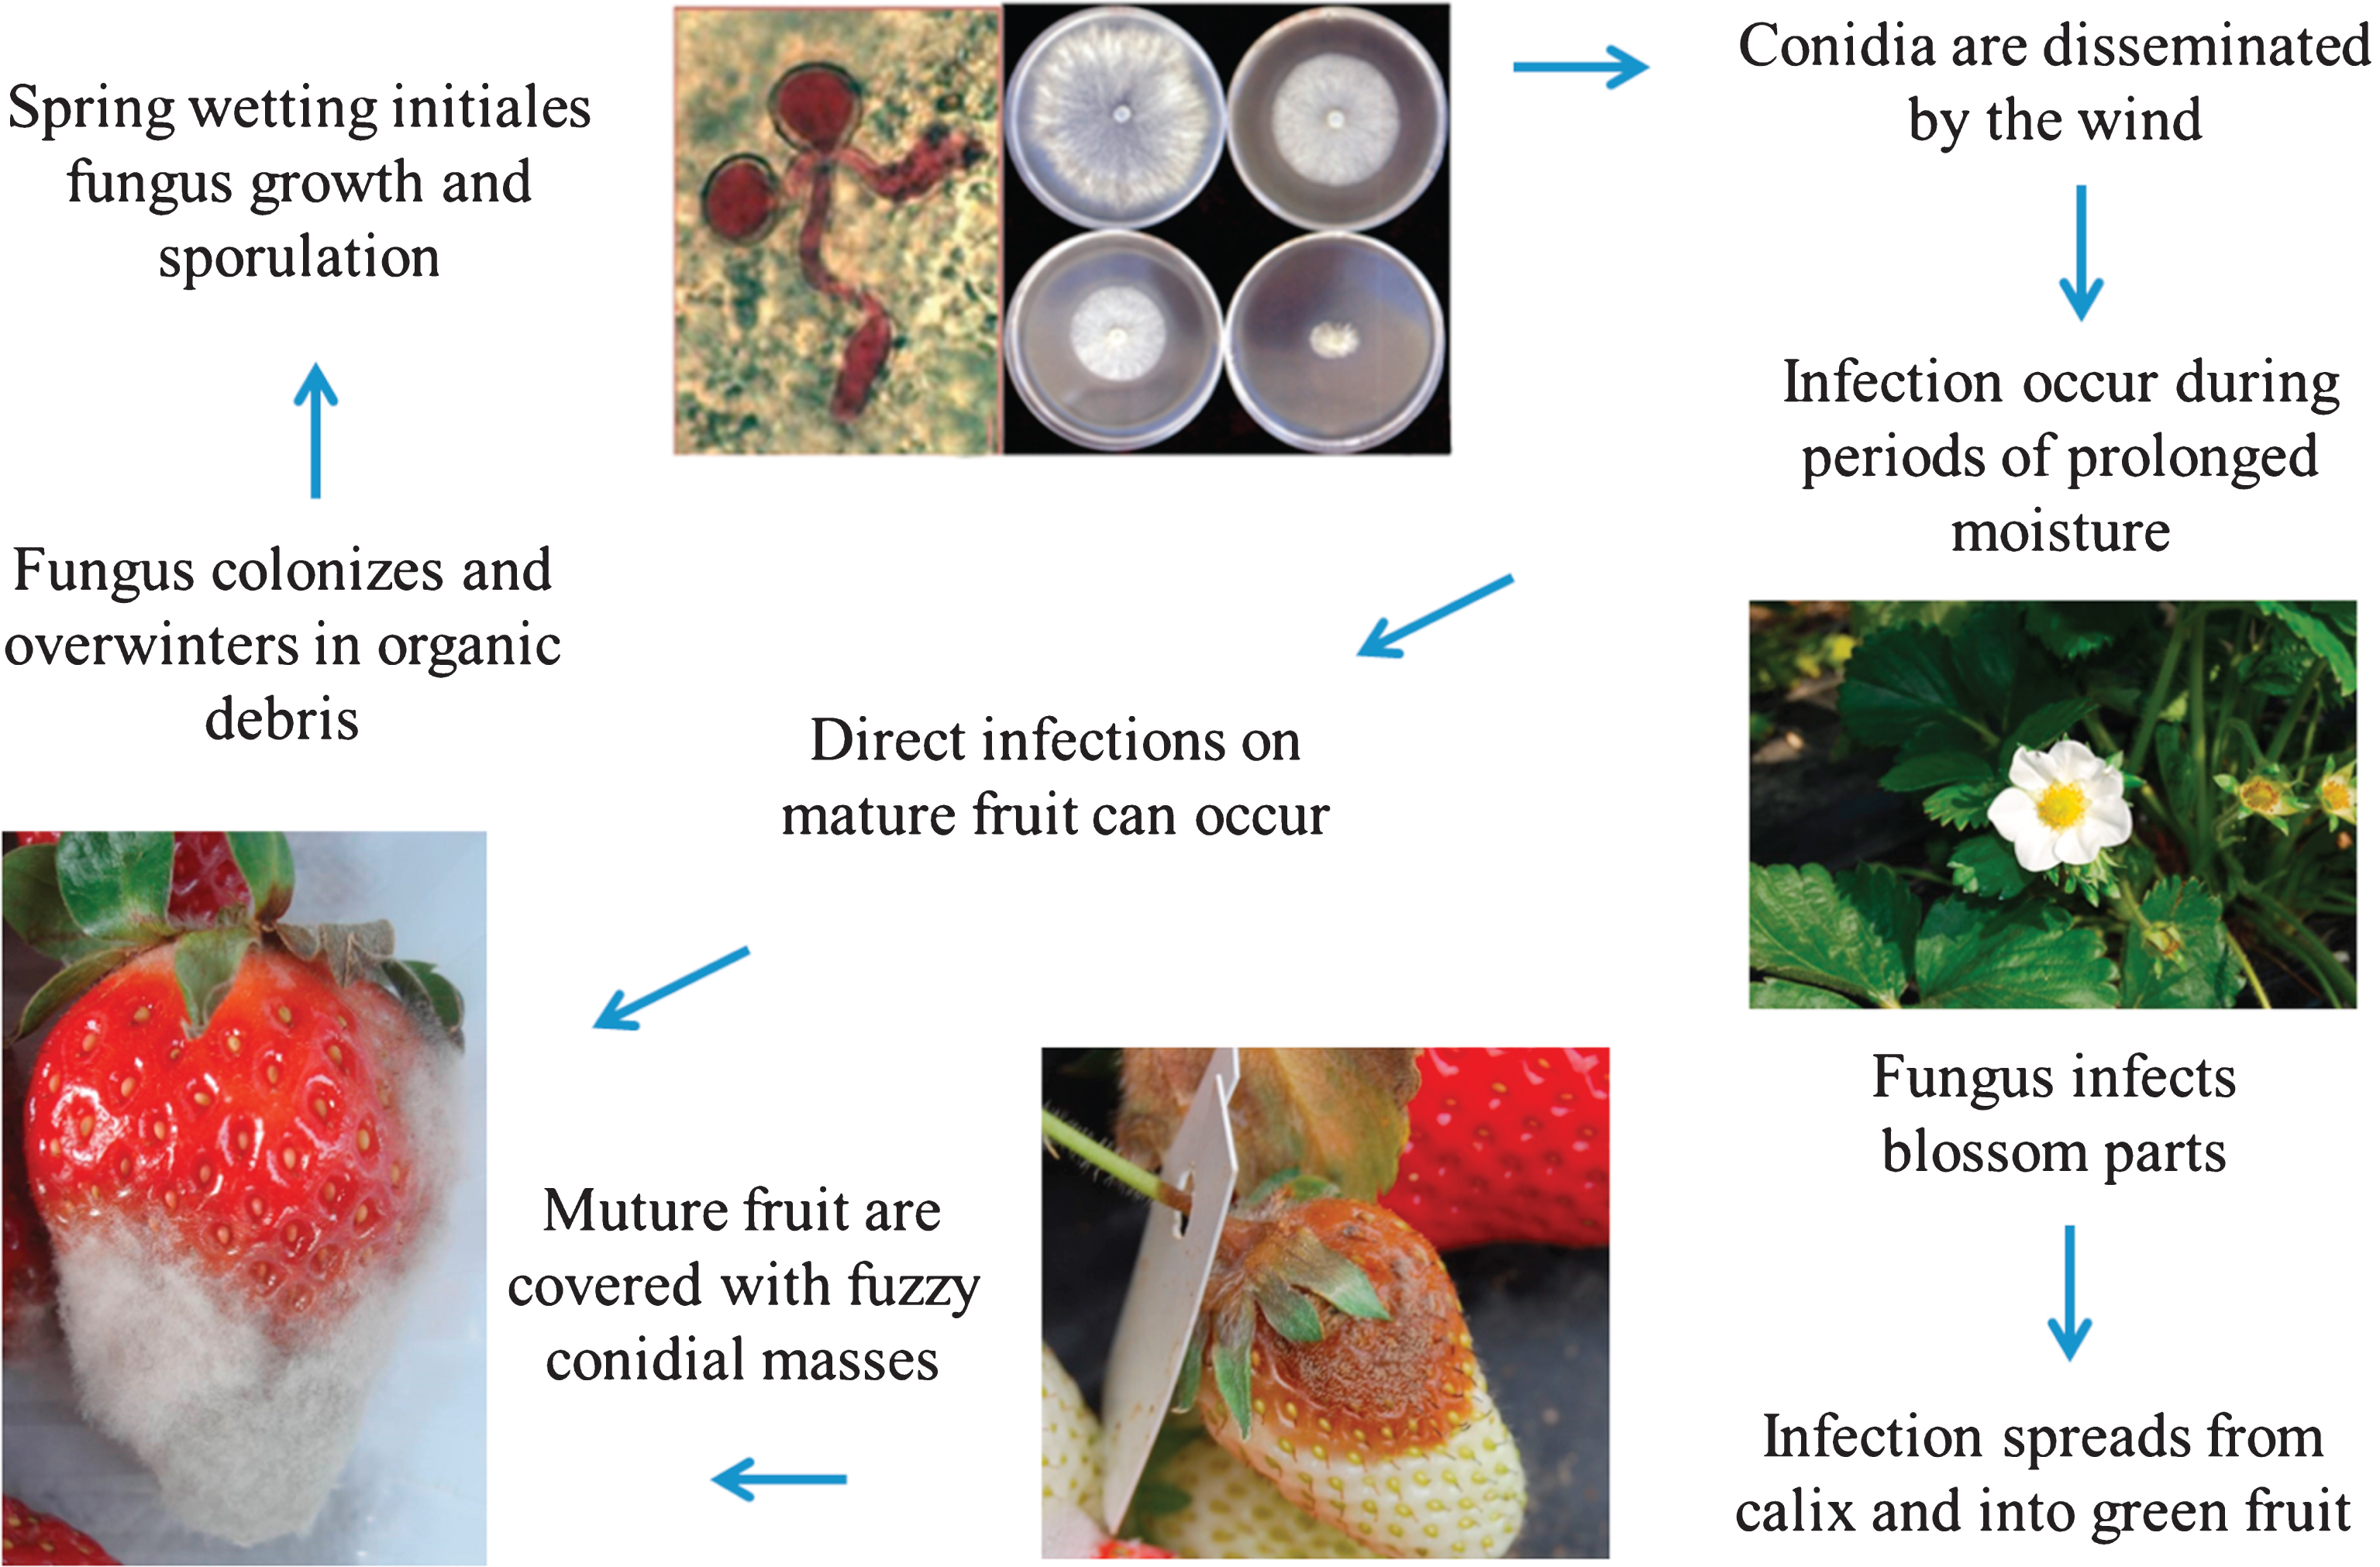 Disease cycle of gray mold on strawberry. Modified from Maas et al. (1998) [14].